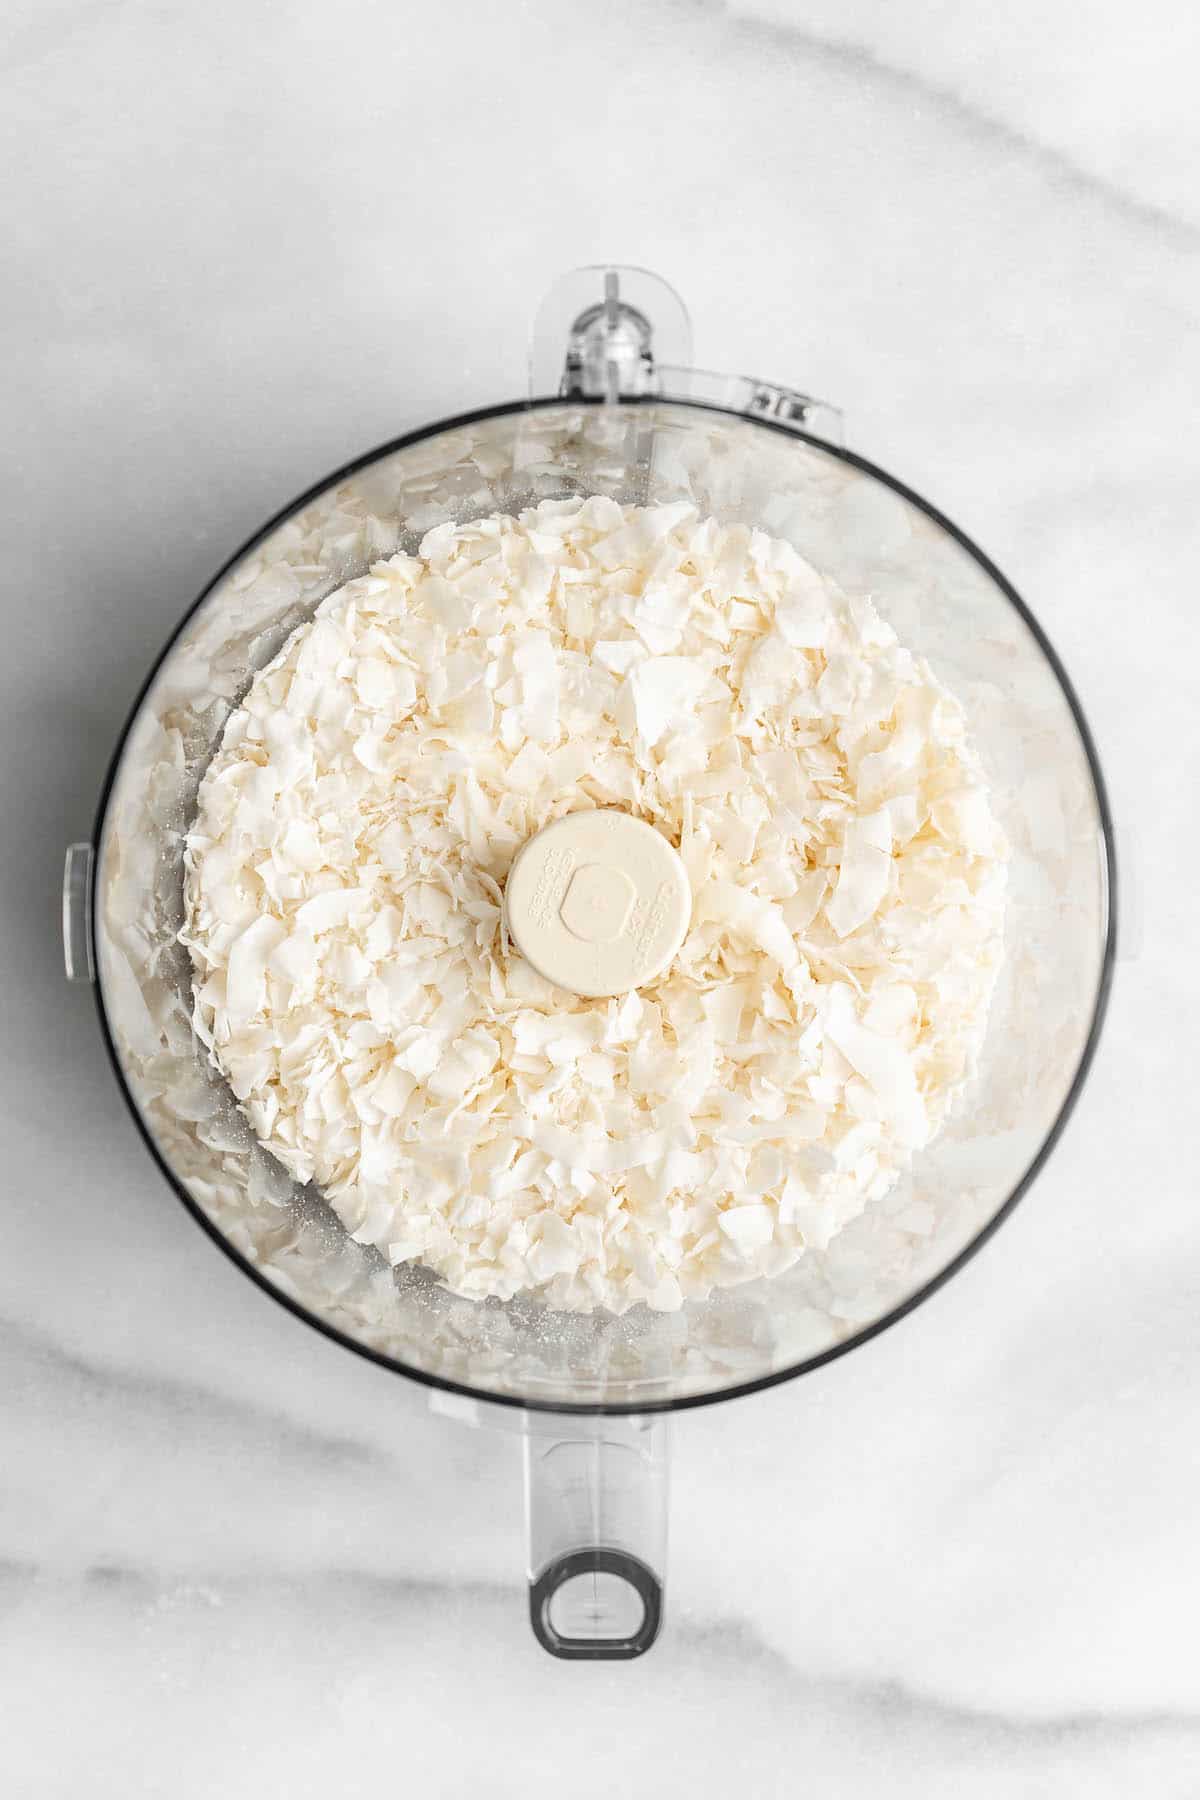 Overhead view of coconut flakes in food processor bowl